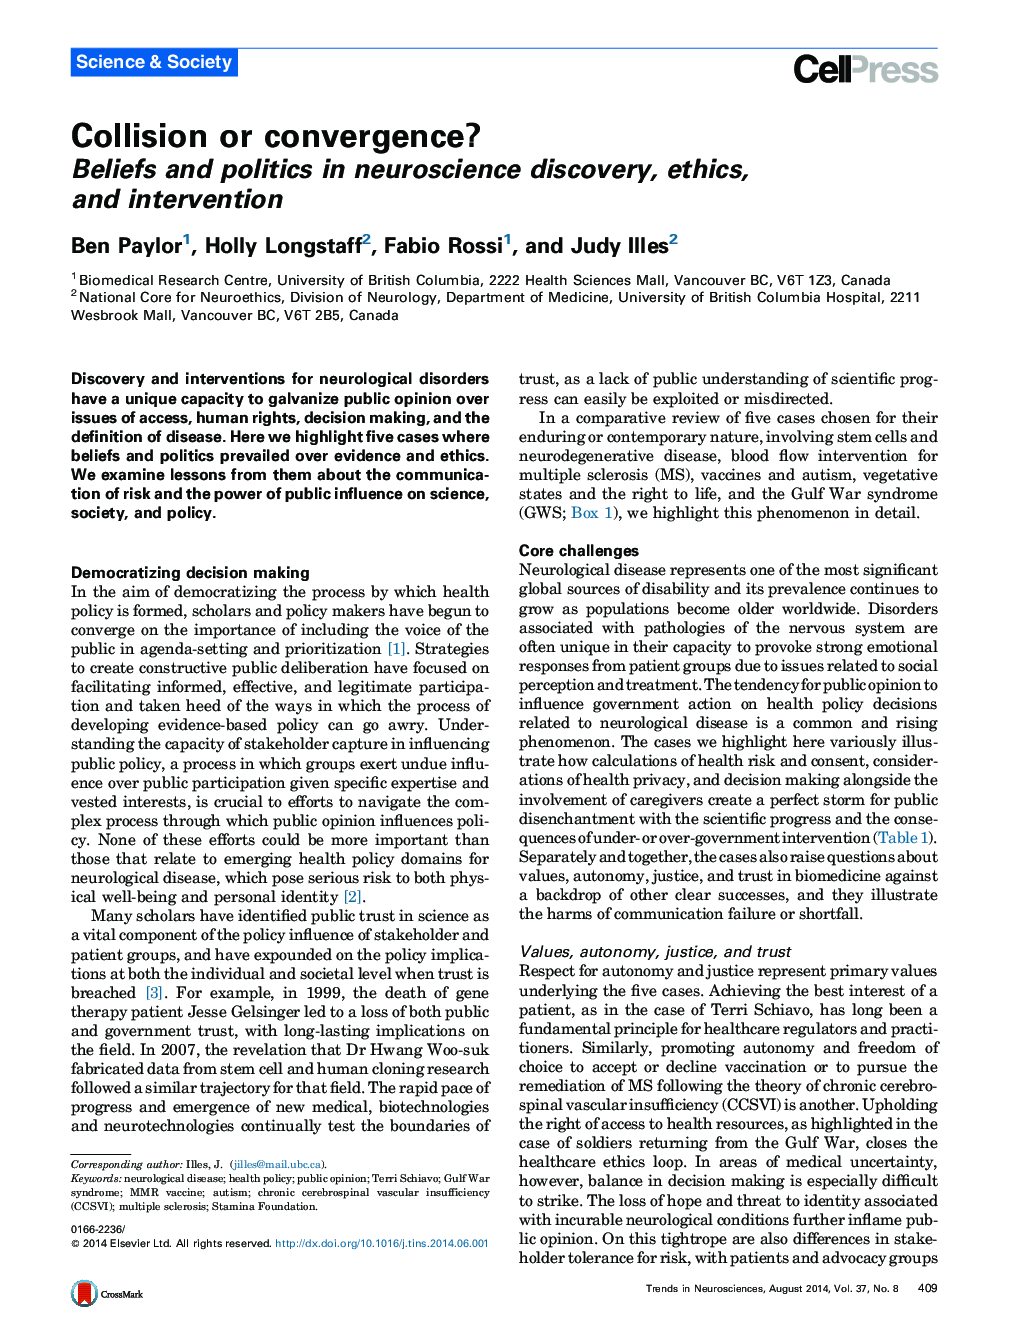 Collision or convergence?: Beliefs and politics in neuroscience discovery, ethics, and intervention